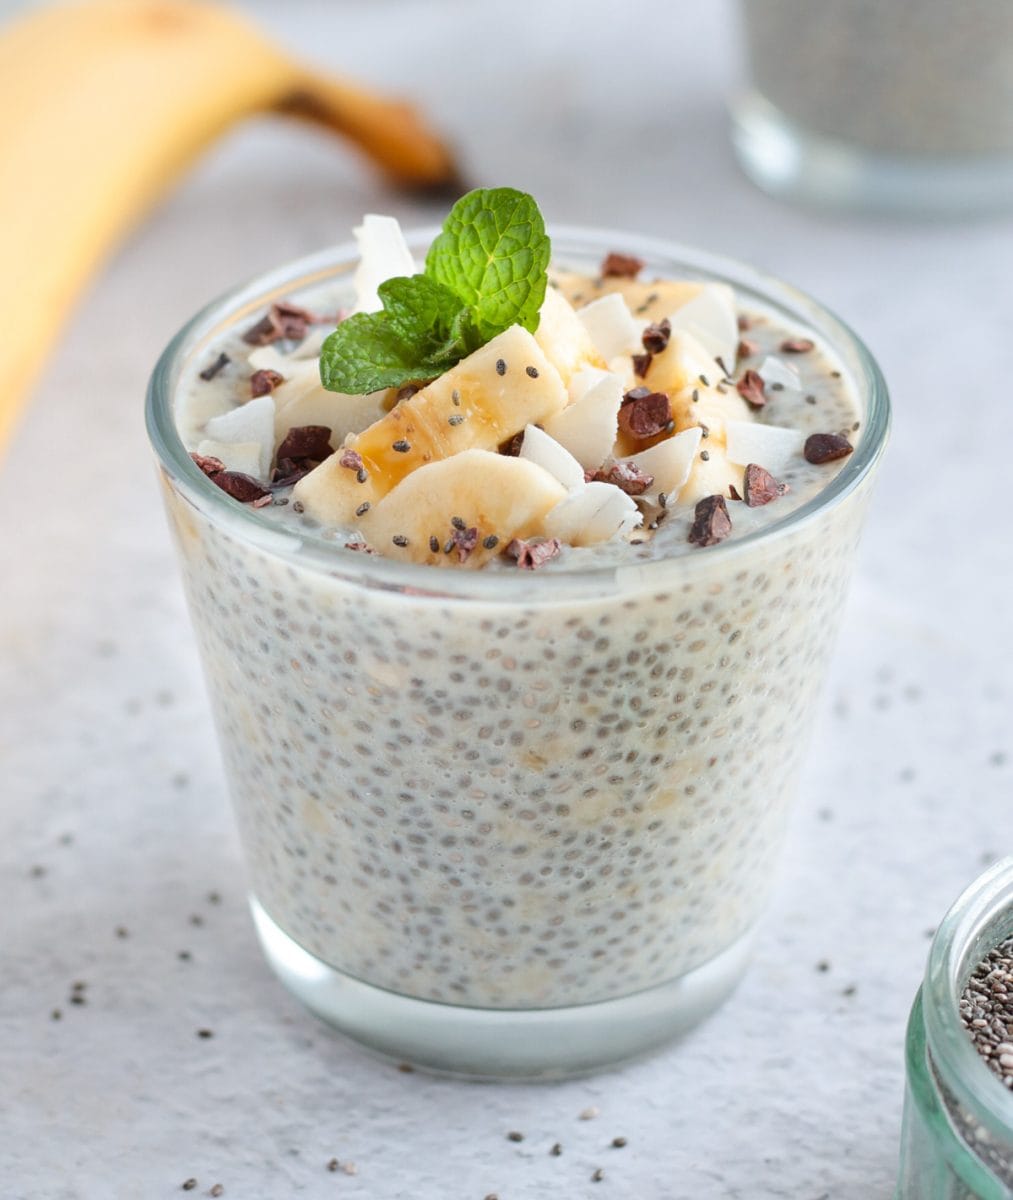 One Chia Seed Pudding topped with banana slices and fresh mint